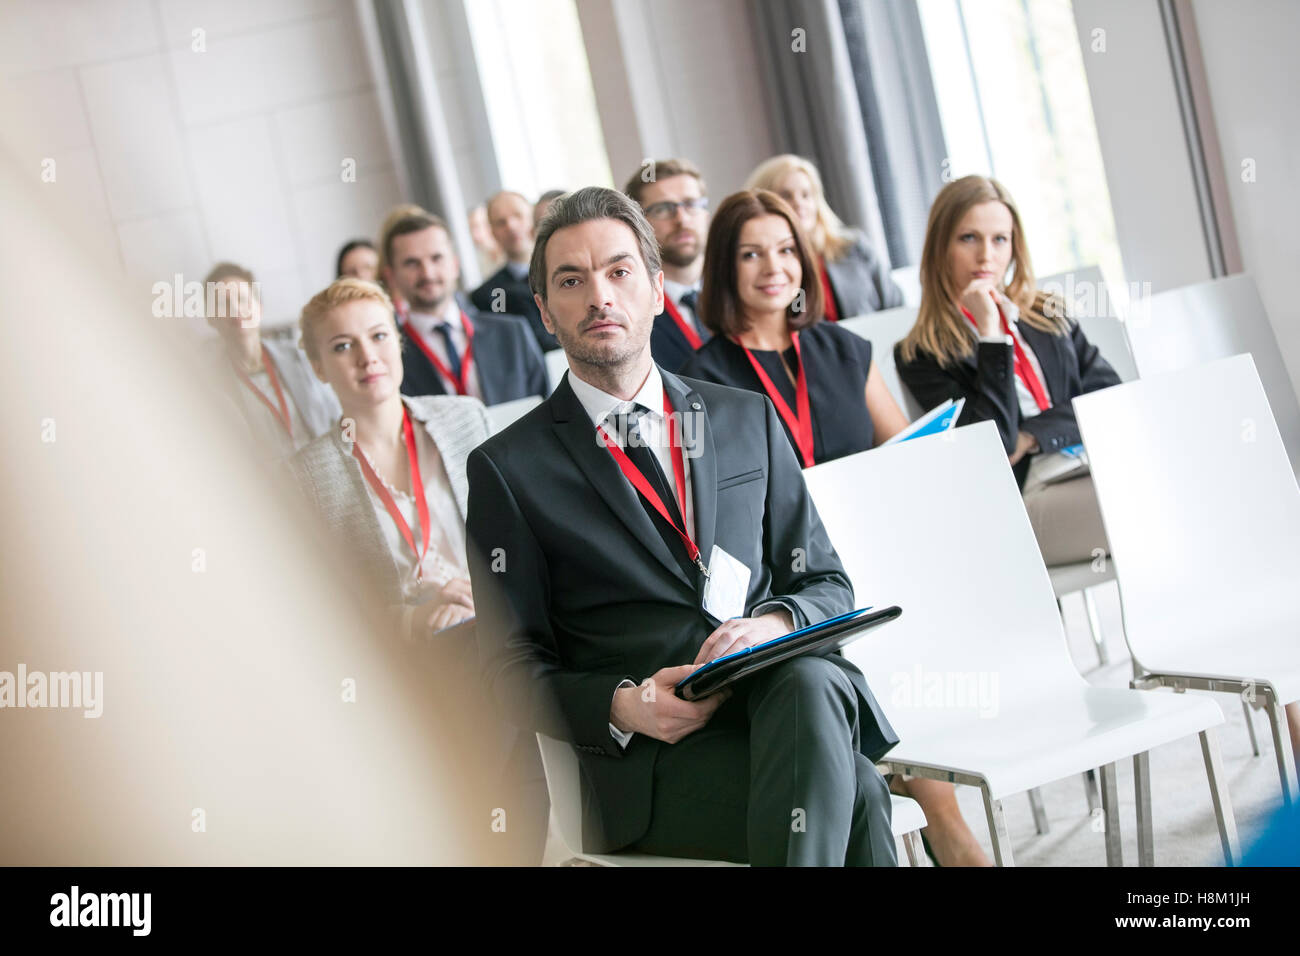 Businessman looking at public speaker during seminar in convention center Stock Photo